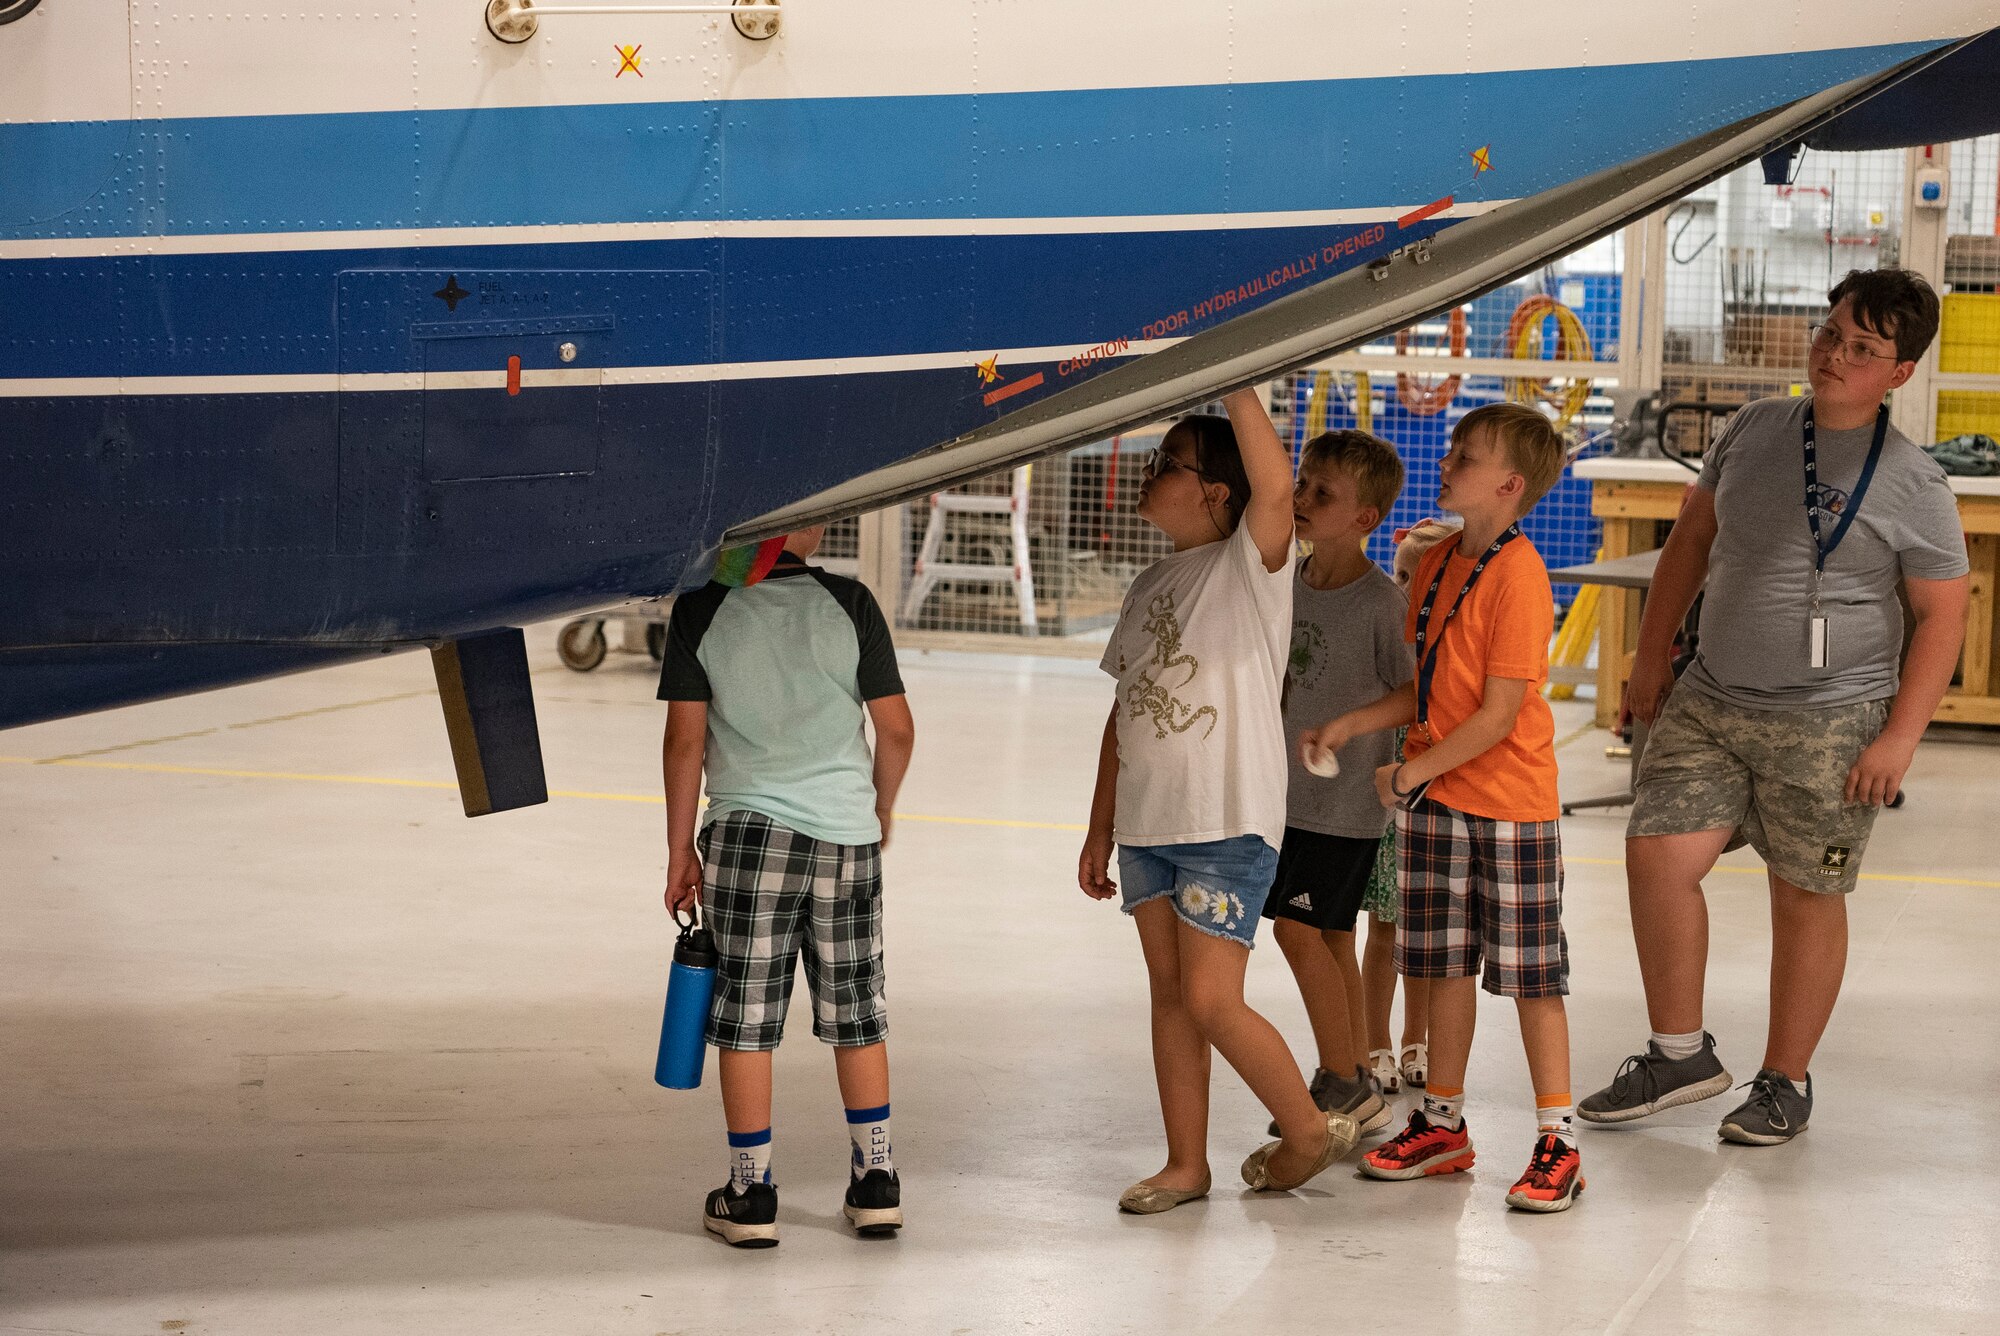 Children look in a parked aircraft